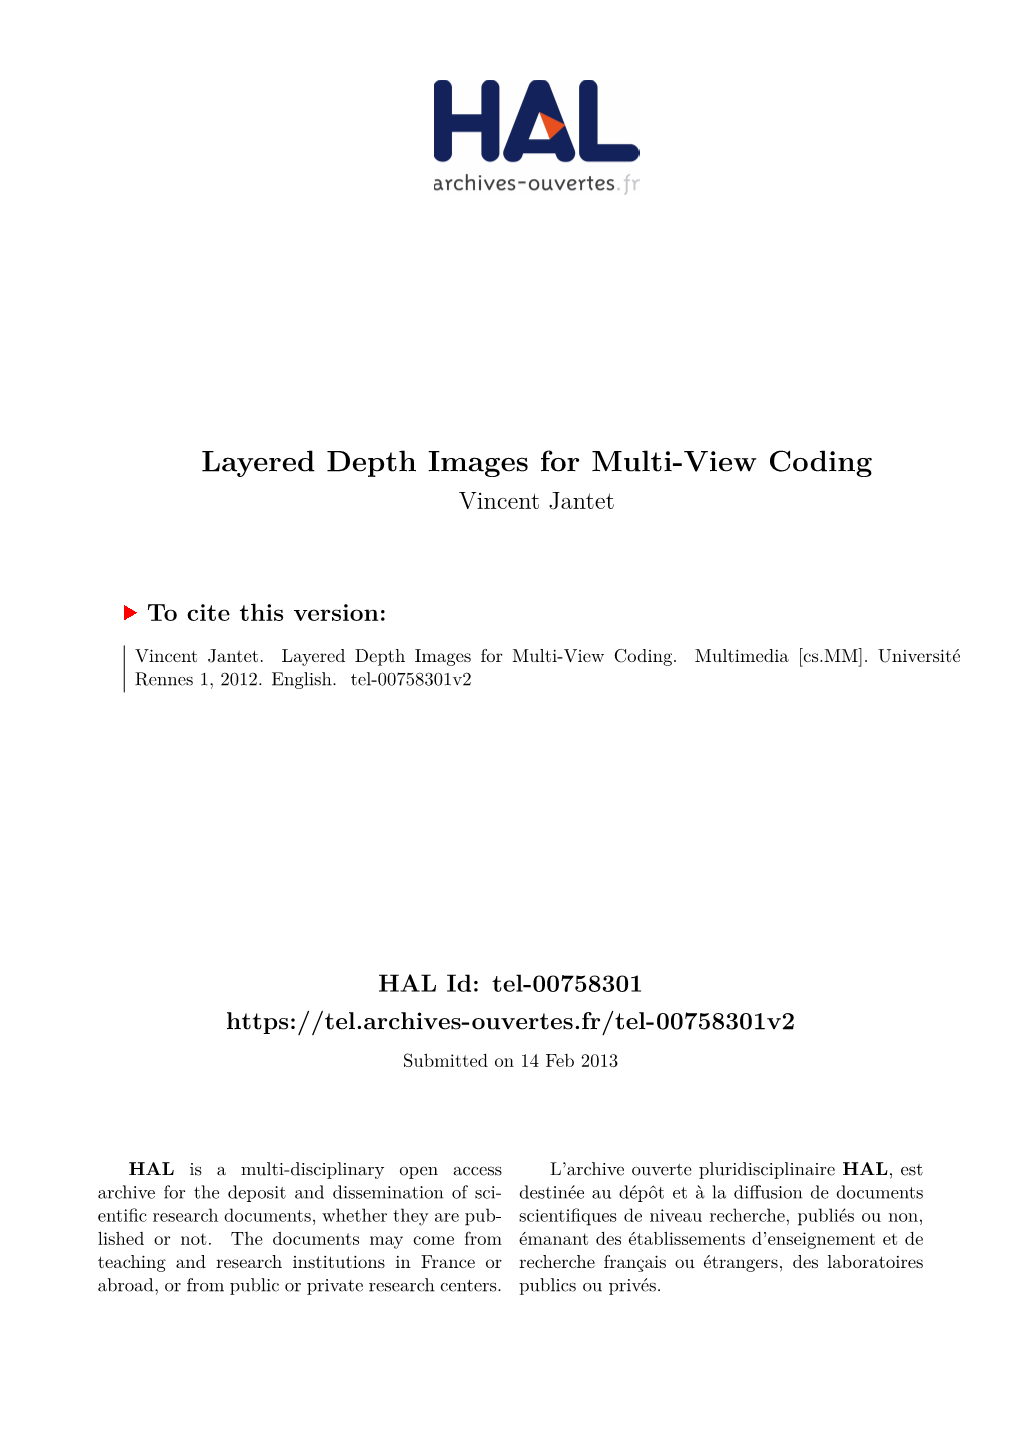 Layered Depth Images for Multi-View Coding Vincent Jantet